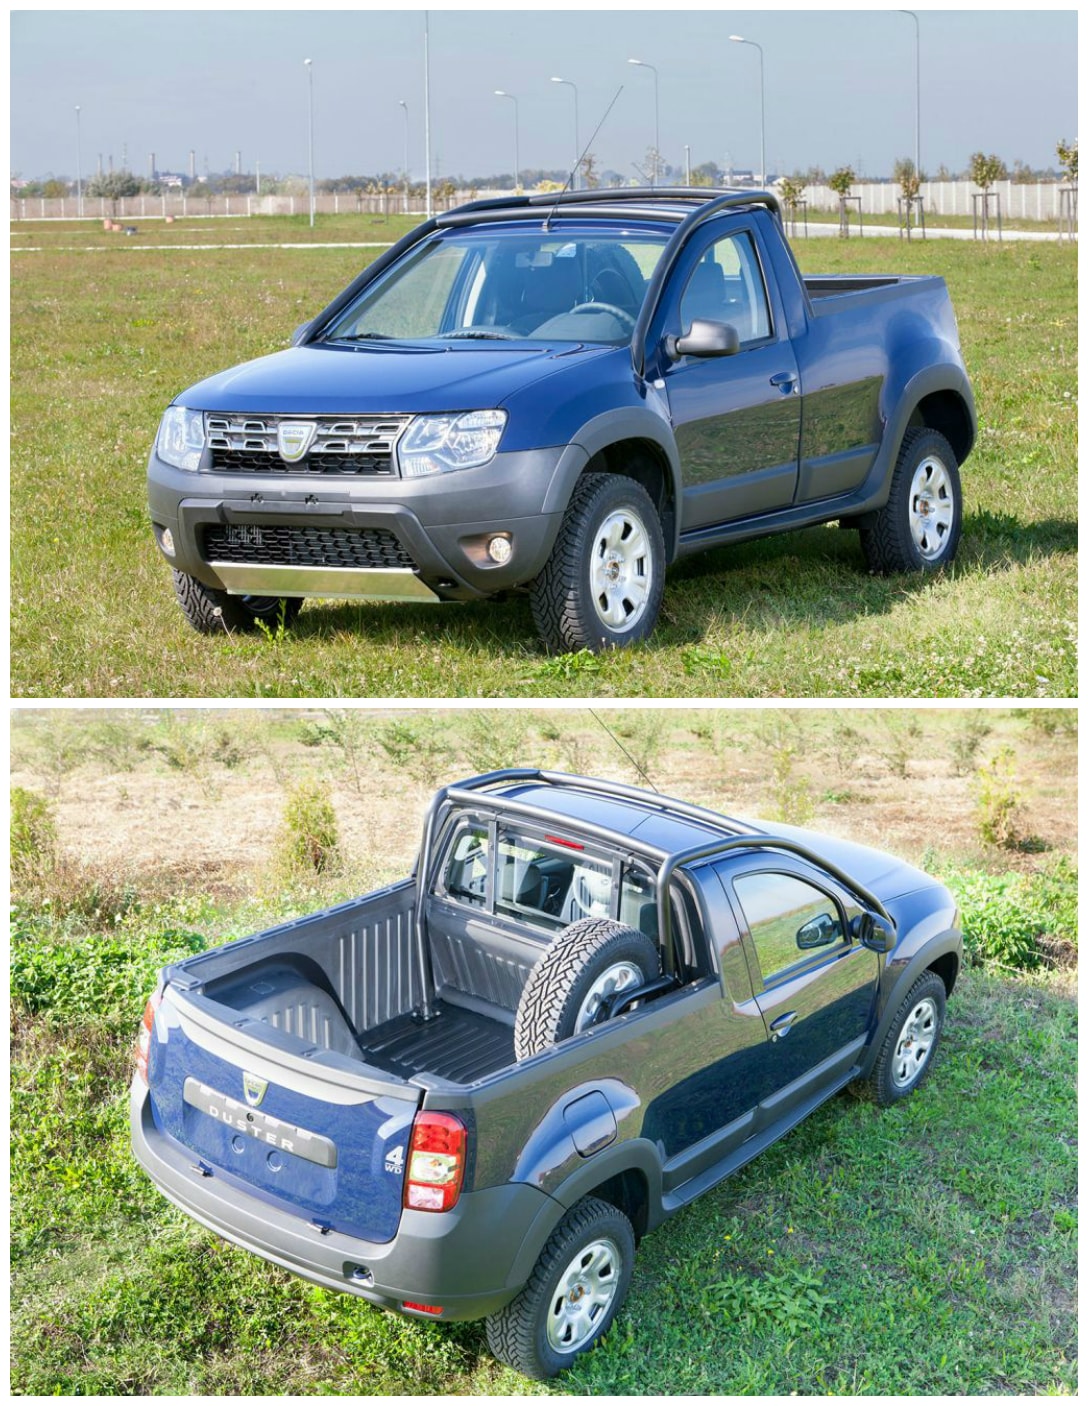 dacia-duster-pick-up-launched-as-limited